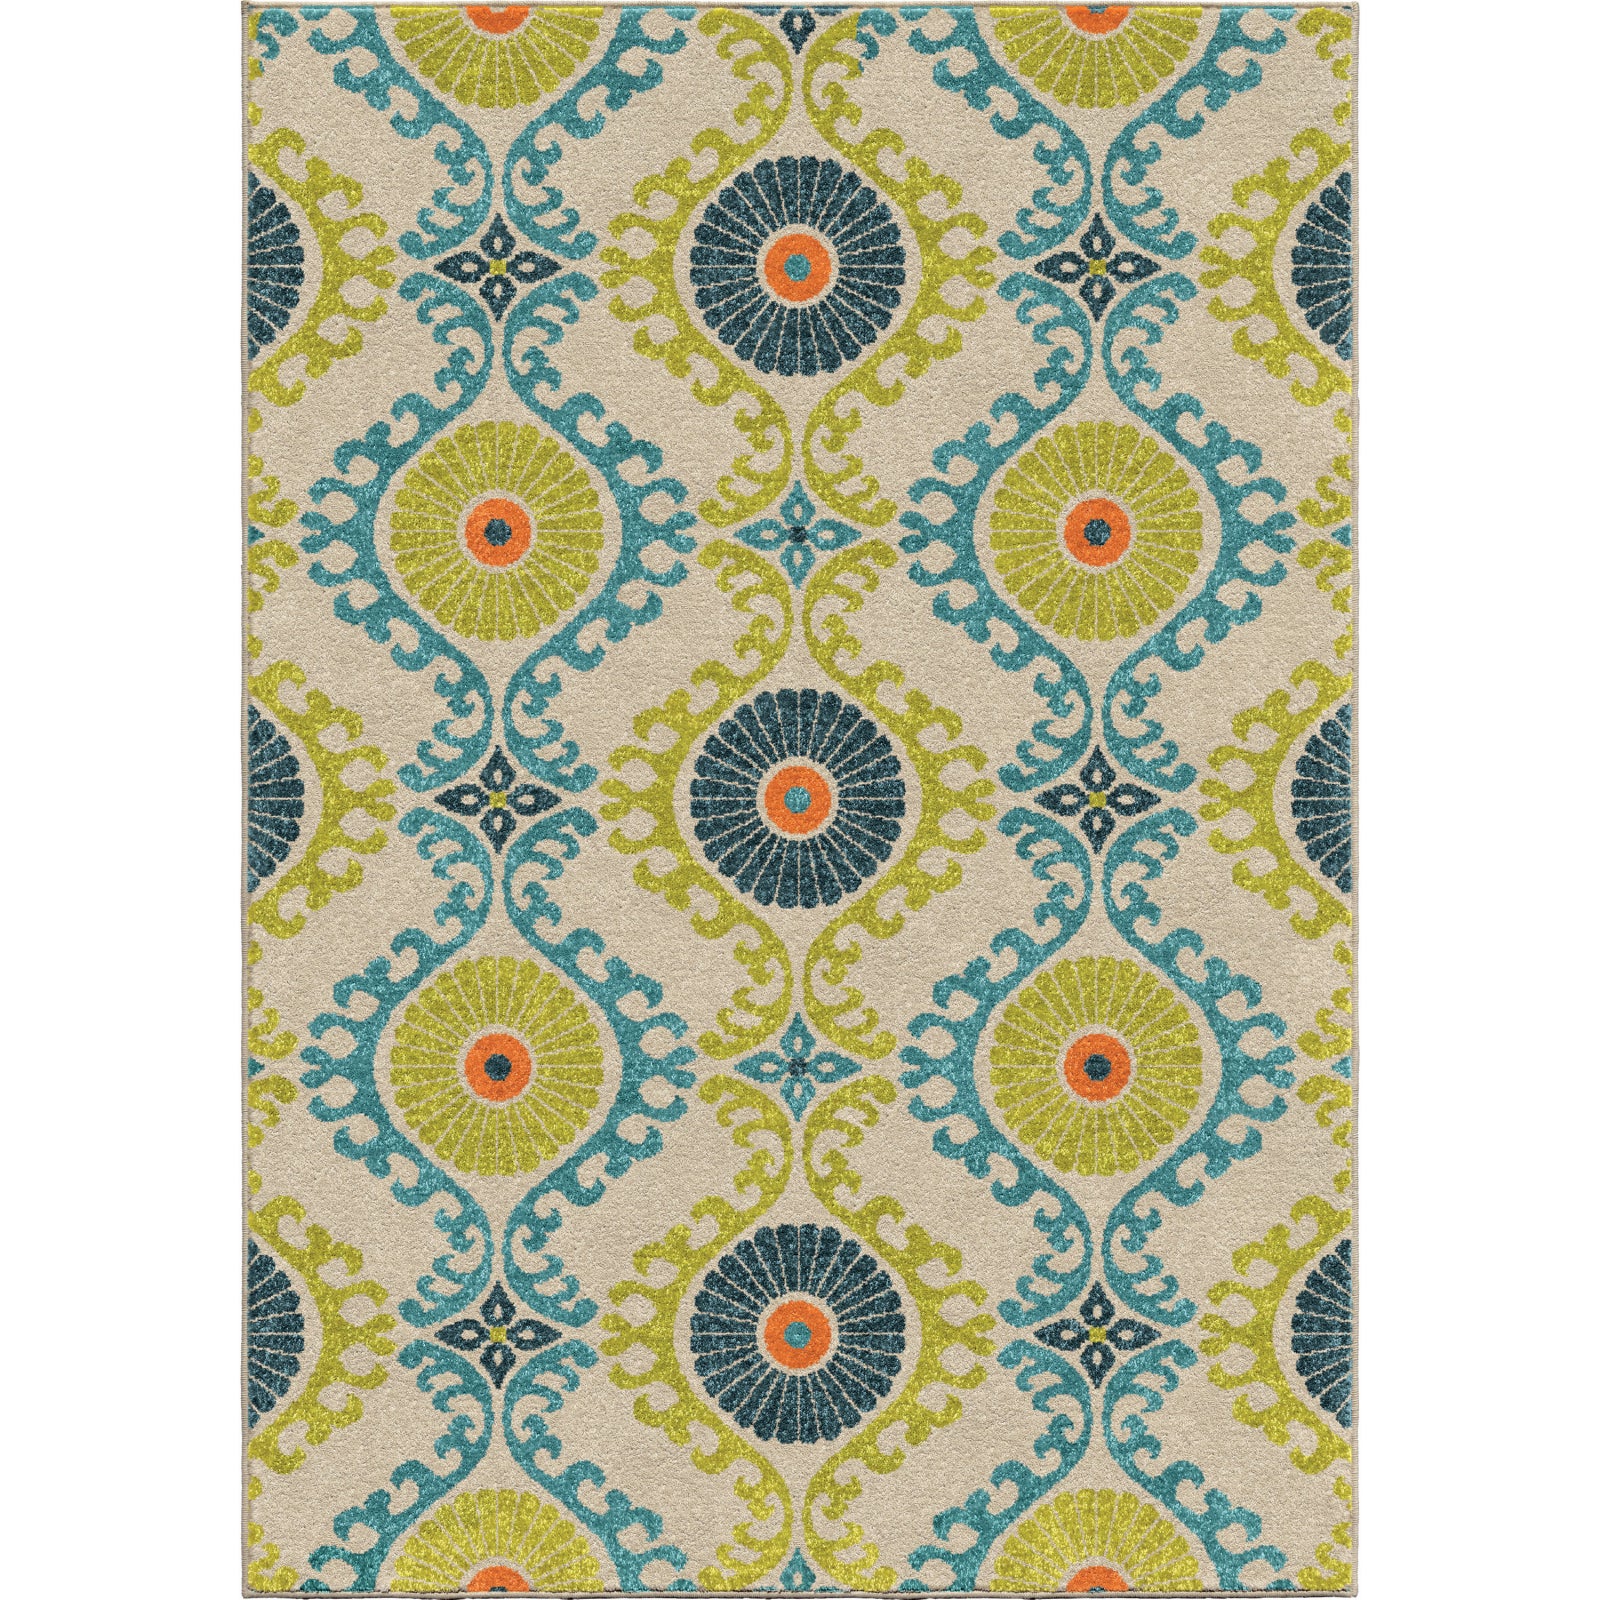 Orian Rugs Promise Floating Floral Multi Area Rug main image